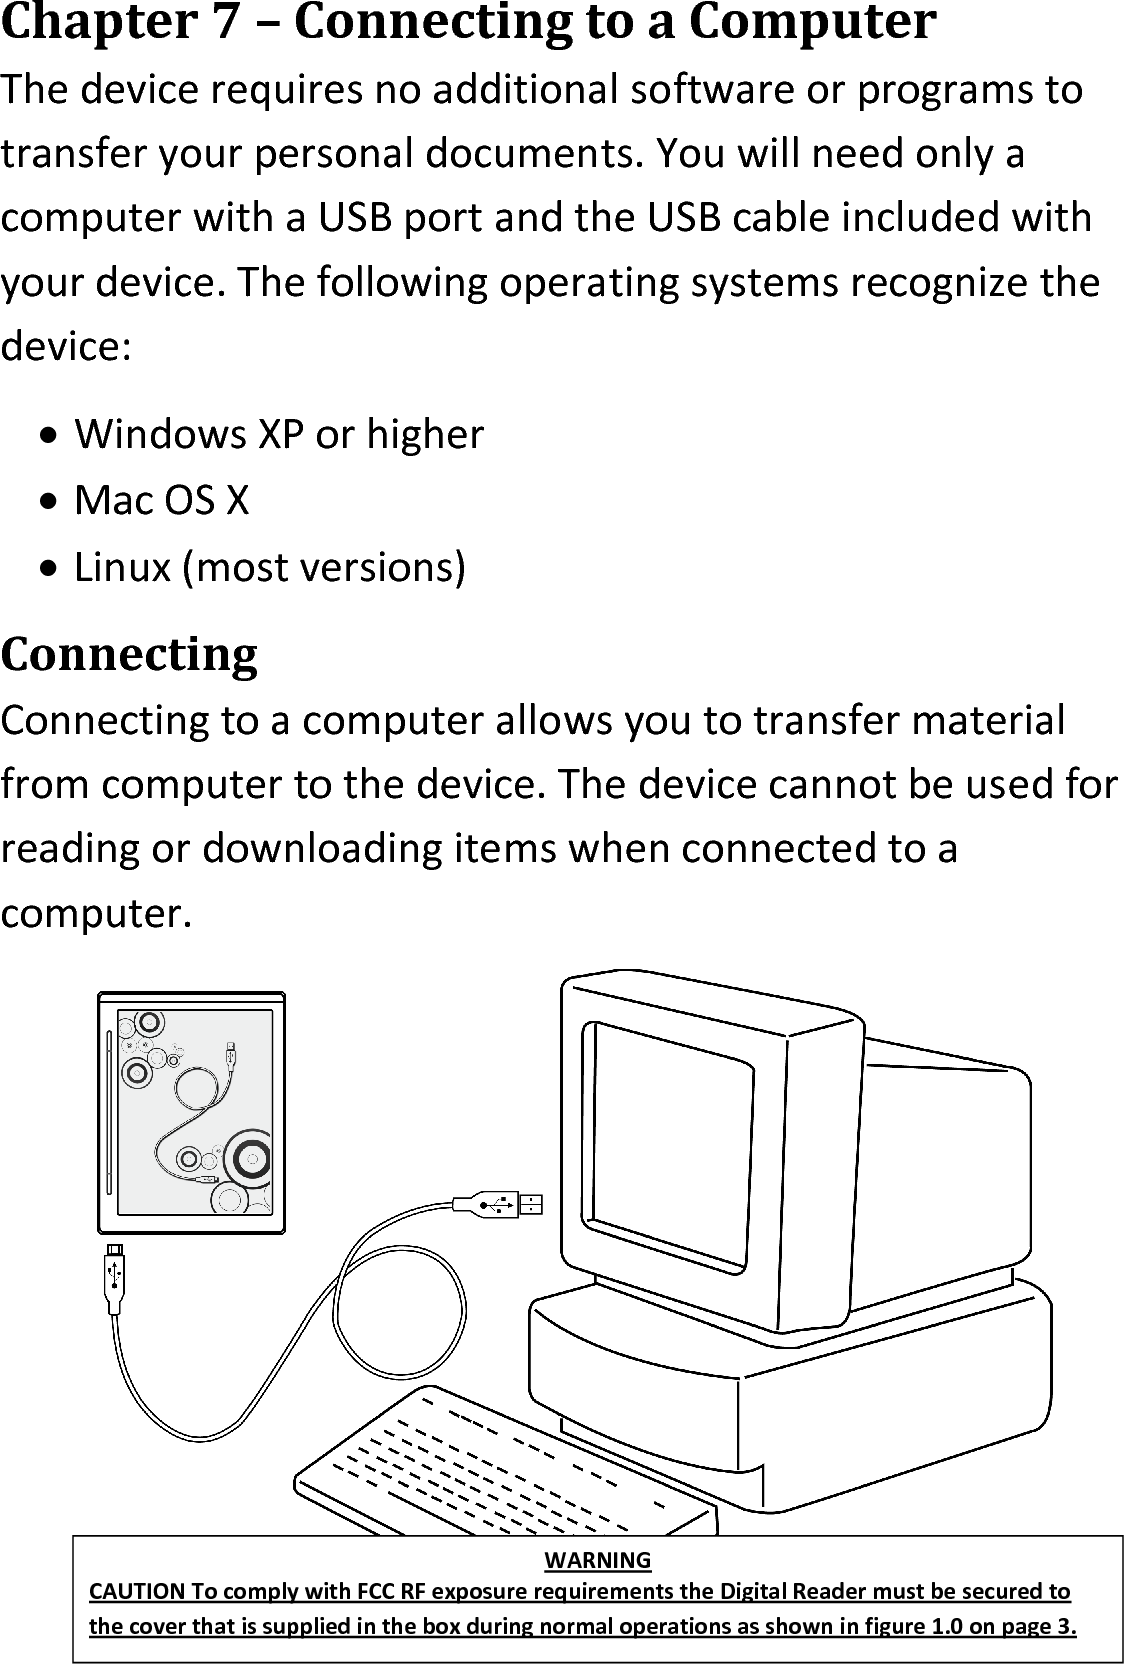 Chapter 7 – Connecting to a ComputerThe device requires no additional software or programs to transfer your personal documents. You will need only a computer with a USB port and the USB cable included with your device. The following operating systems recognize the device: Windows XP or higherMac OS XLinux (most versions)ConnectingConnecting to a computer allows you to transfer material from computer to the device. The device cannot be used for reading or downloading items when connected to a computer.WARNINGCAUTION To comply with FCC RF exposure requirements the Digital Reader must be secured to the cover that is supplied in the box during normal operations as shown in figure 1.0 on page 3.